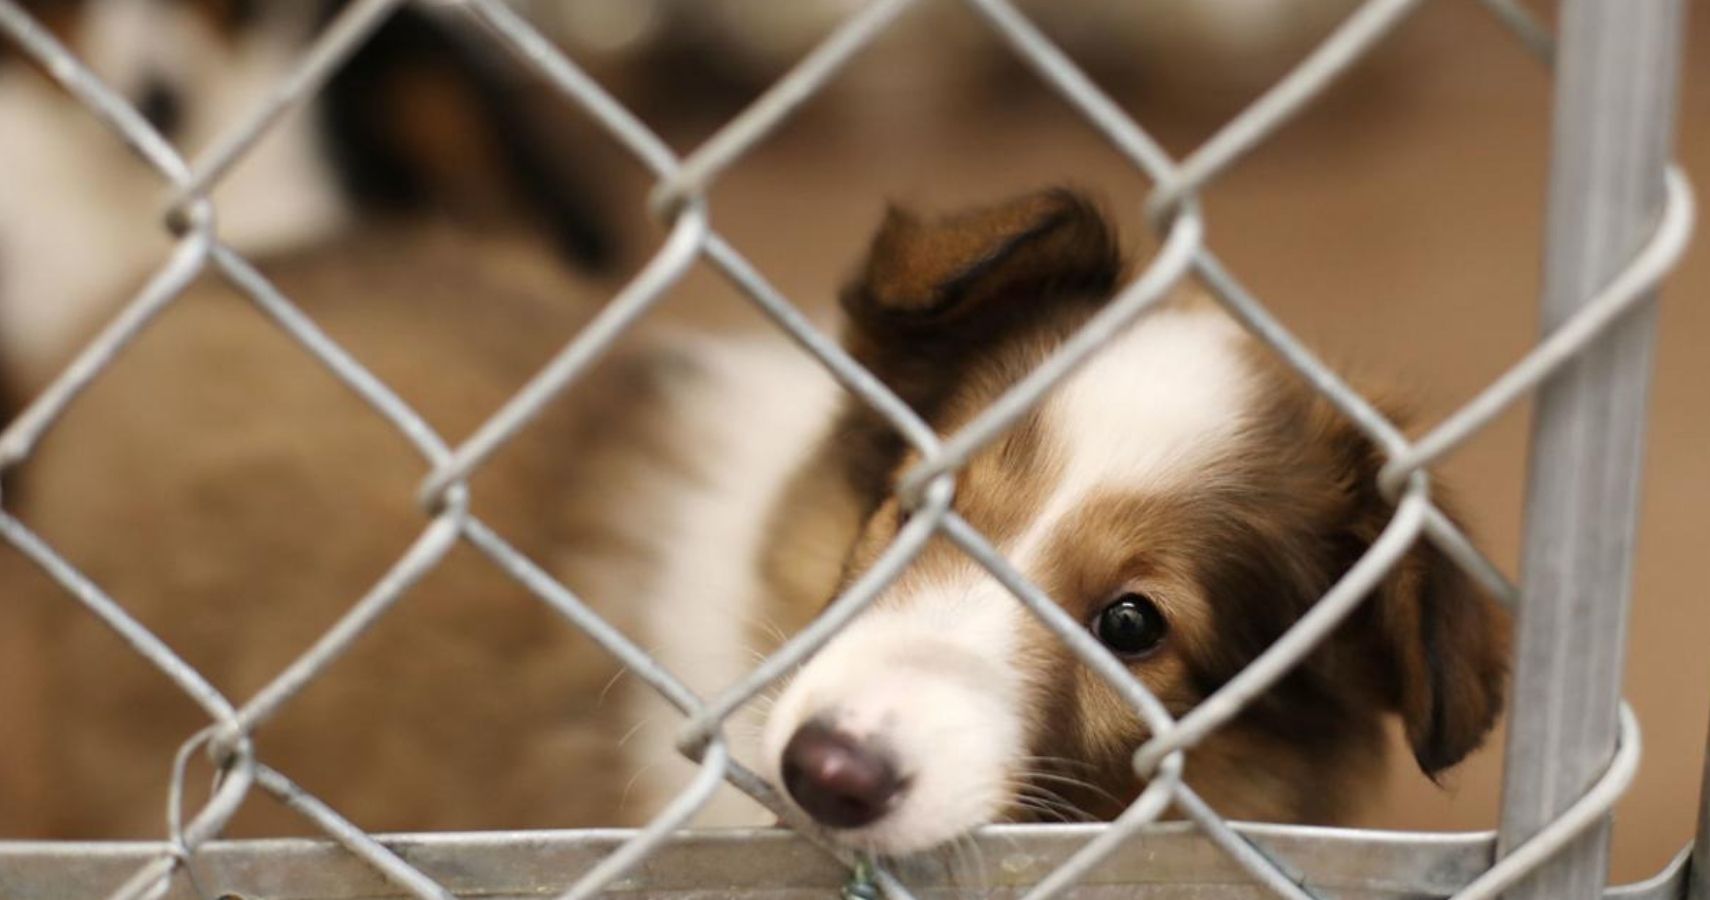 Michigan A “NoKill” State For All Shelter Animals